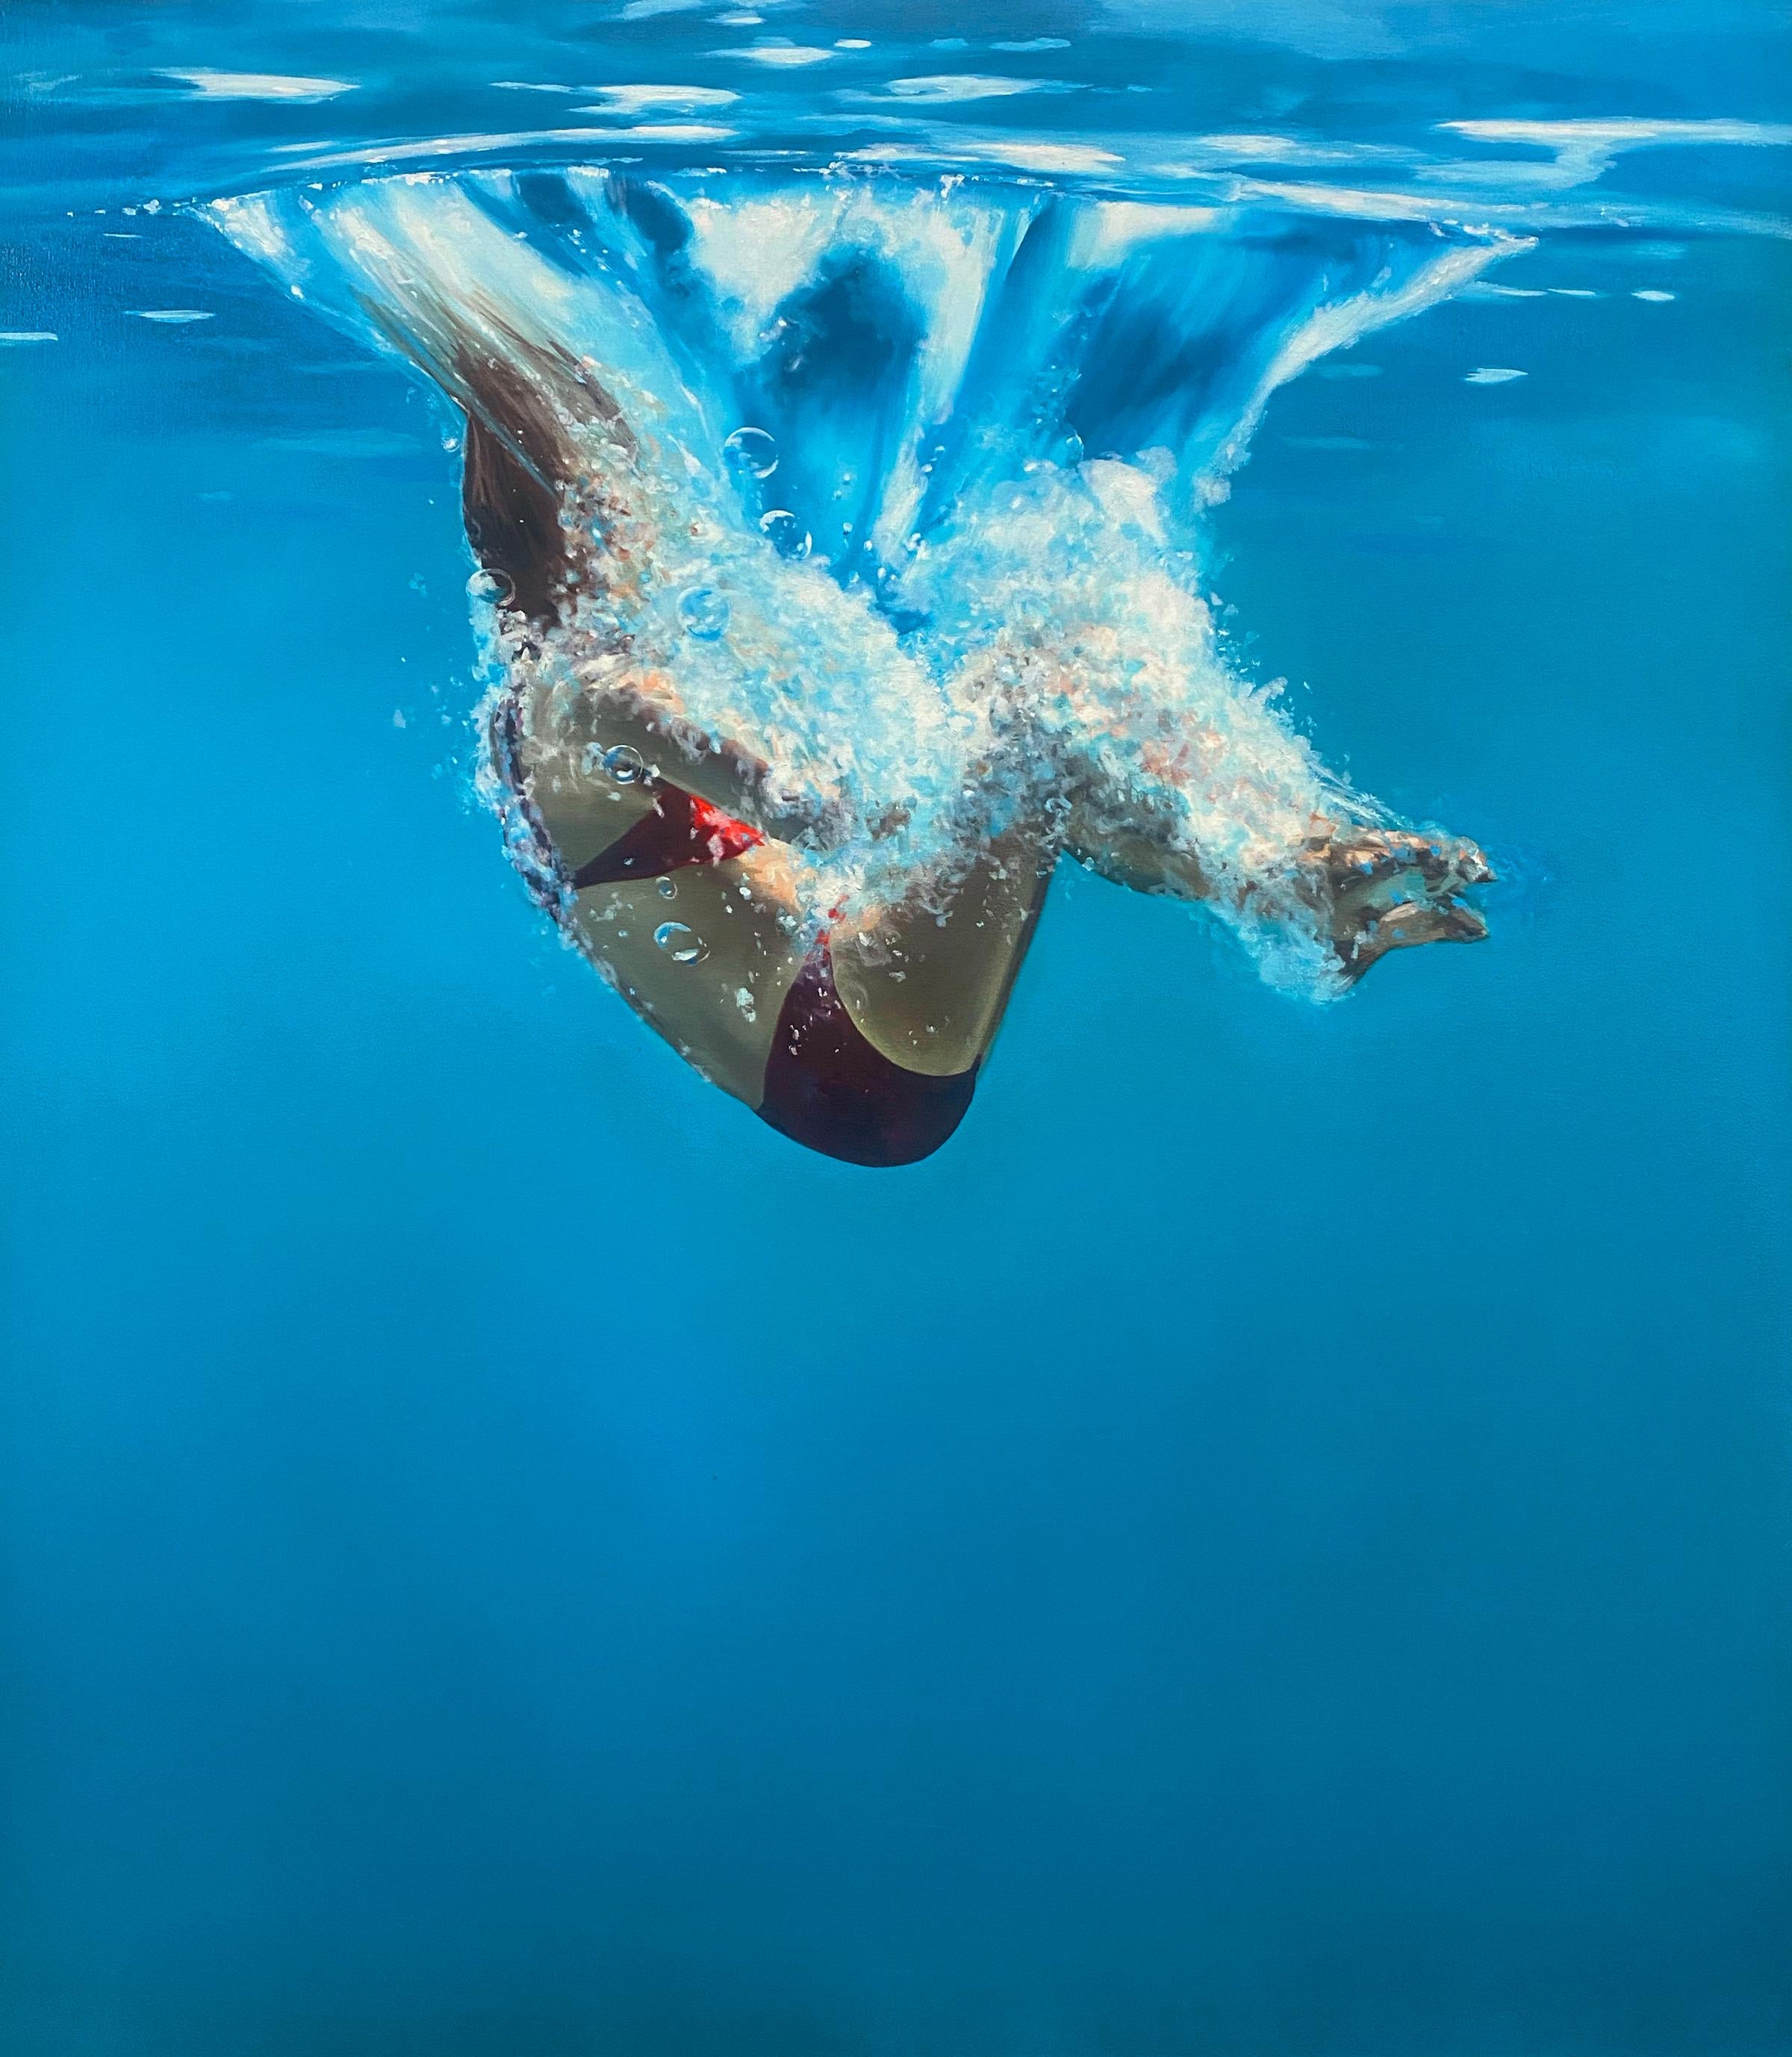 Eric Zener Figurative Painting - ENVELOP - Contemporary Figurative Realism / Swimmer / Diver / Water